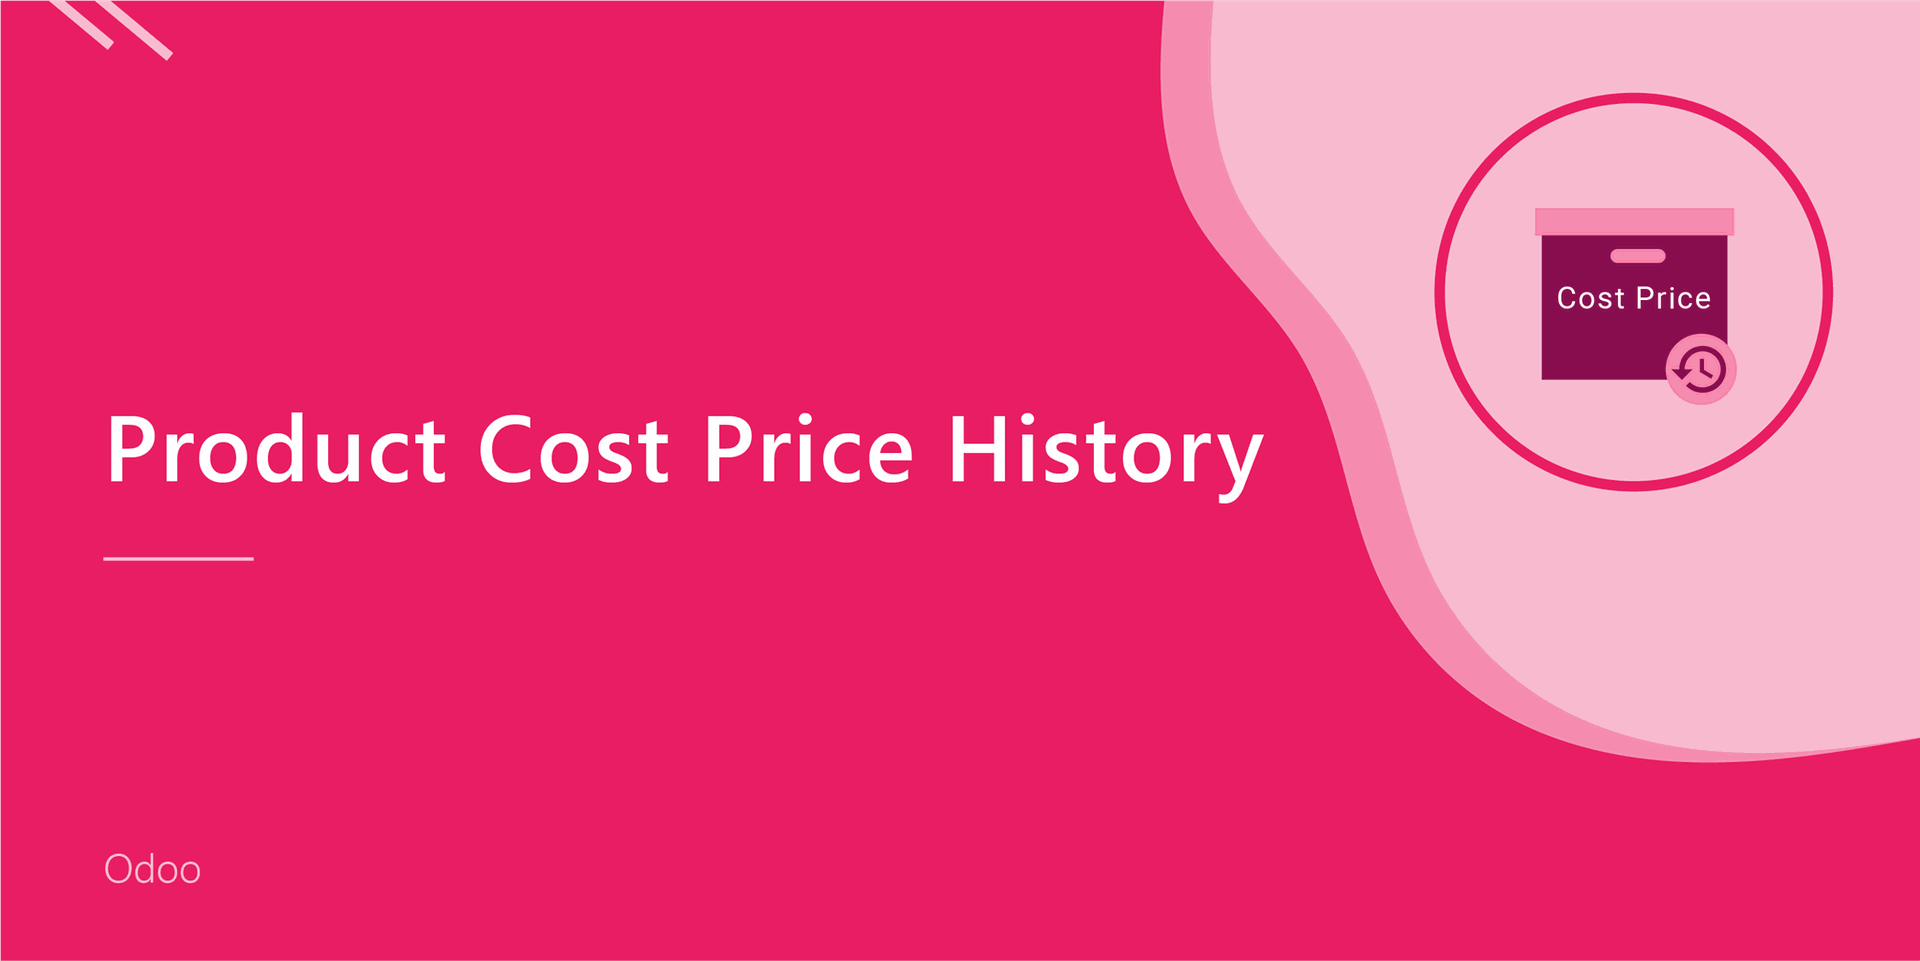 Product Cost Price History
